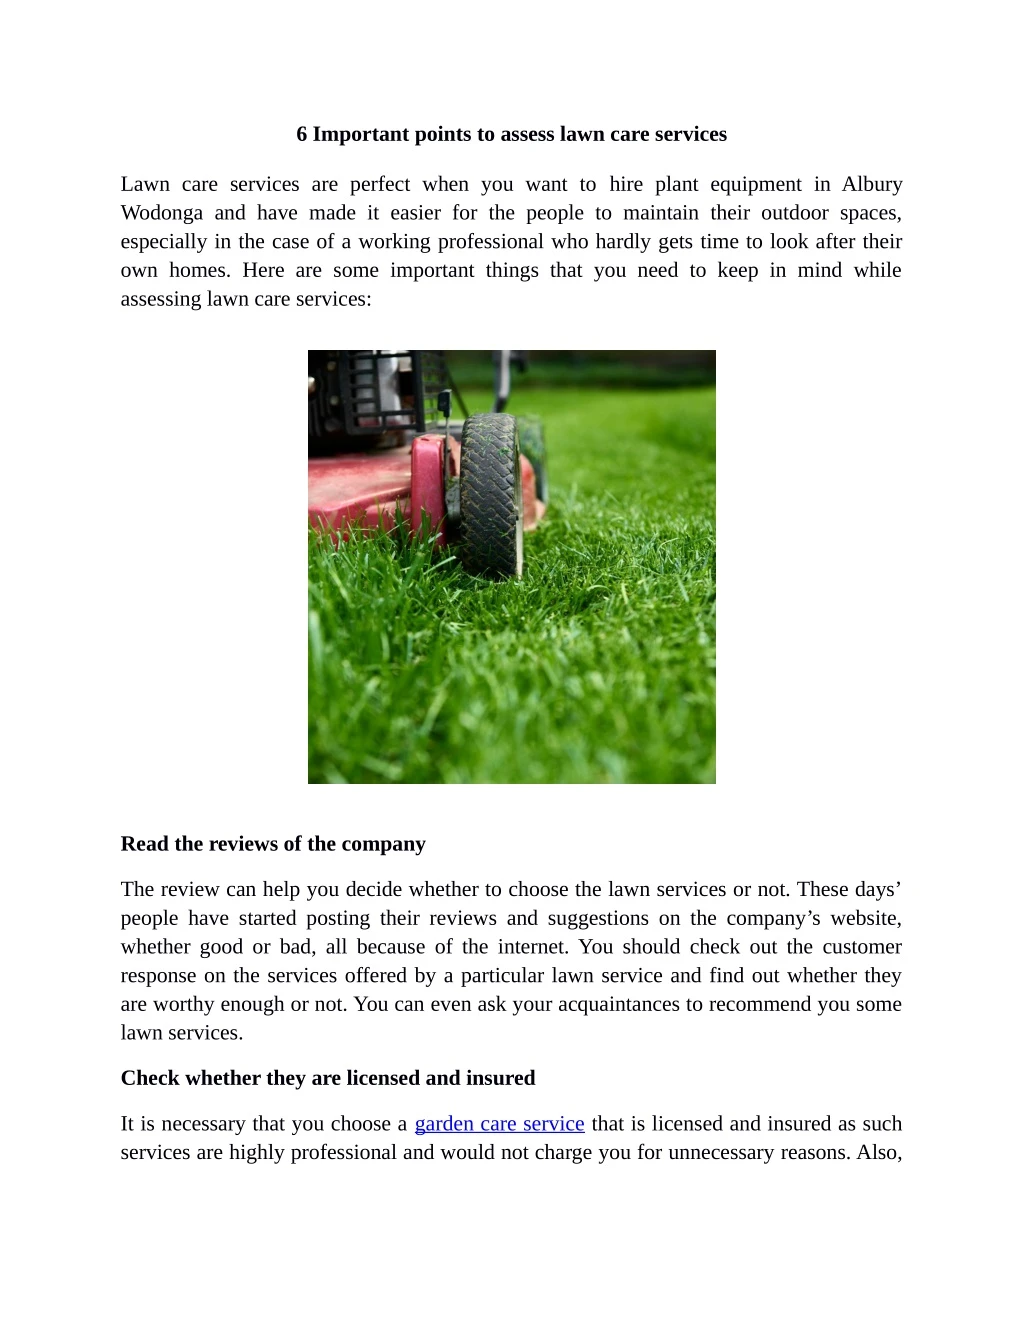 6 important points to assess lawn care services